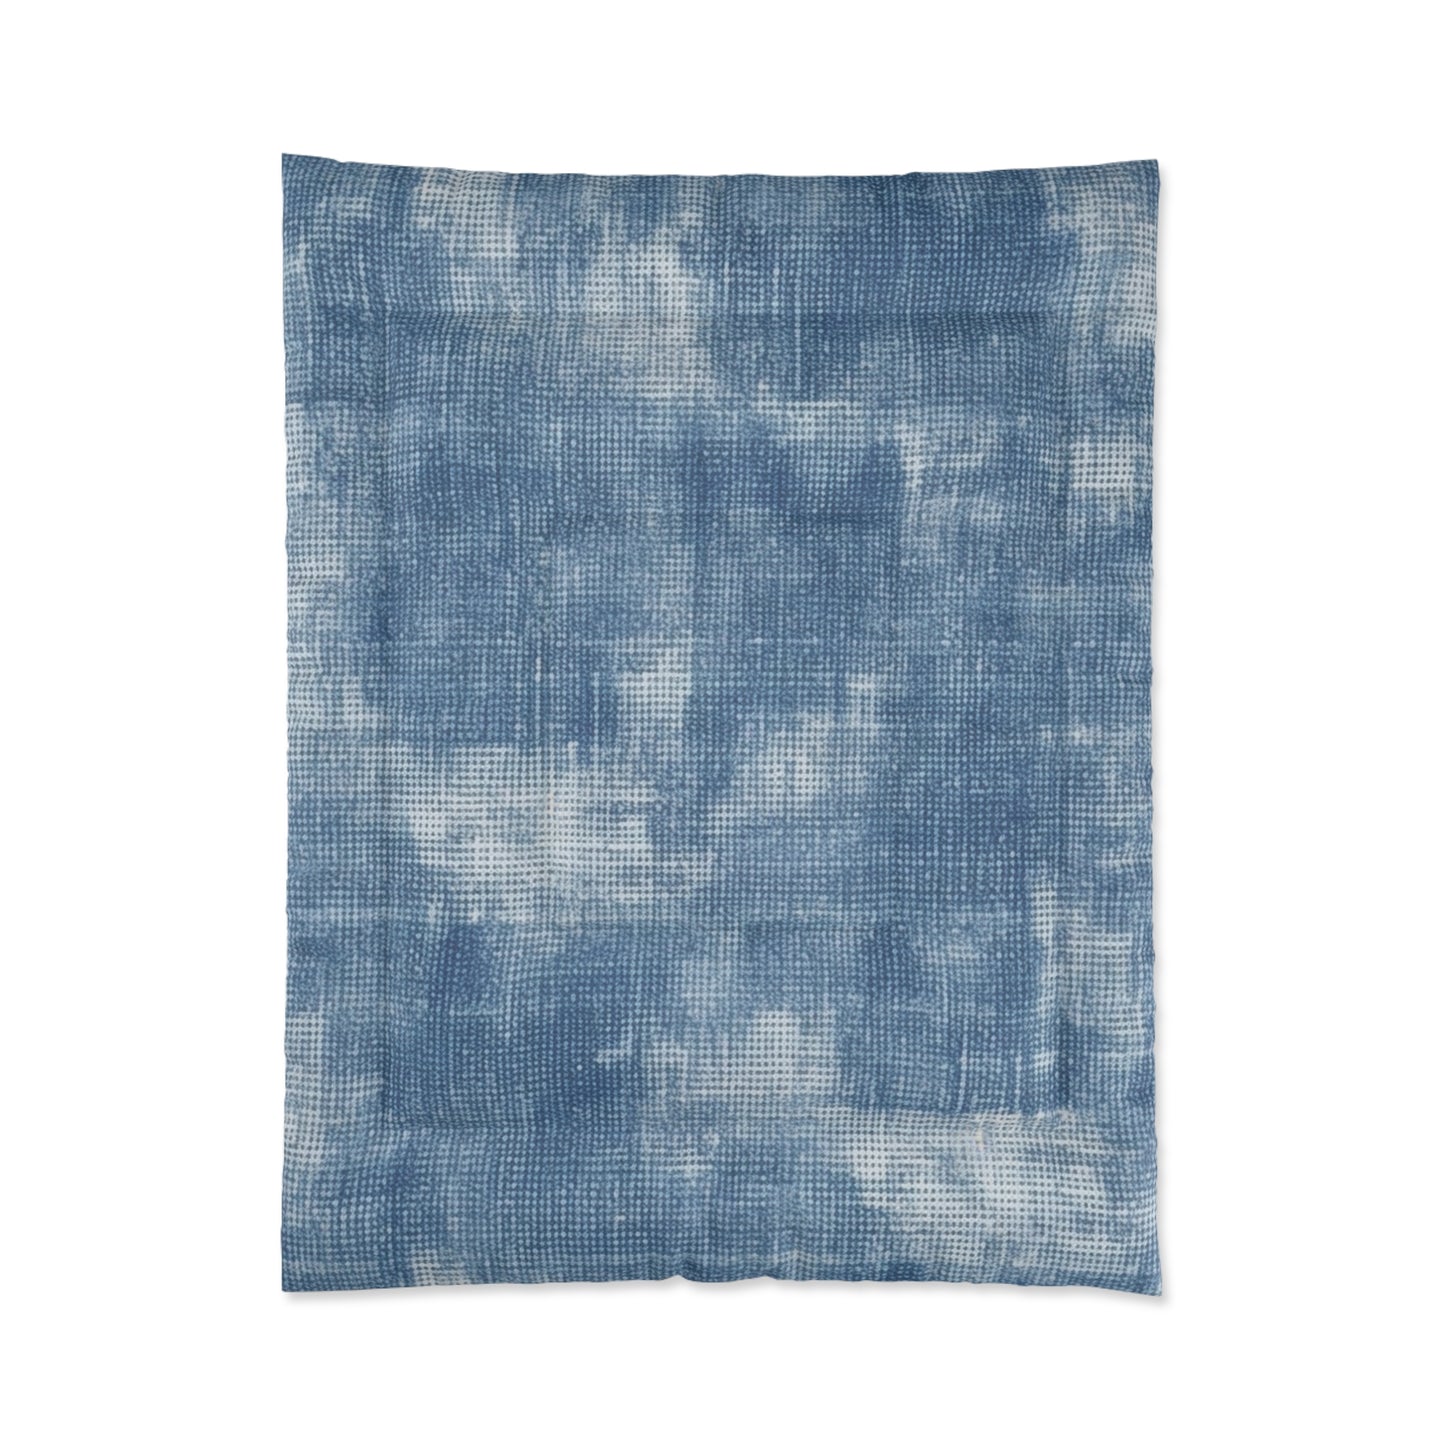 Faded Blue Washed-Out: Denim-Inspired, Style Fabric - Comforter